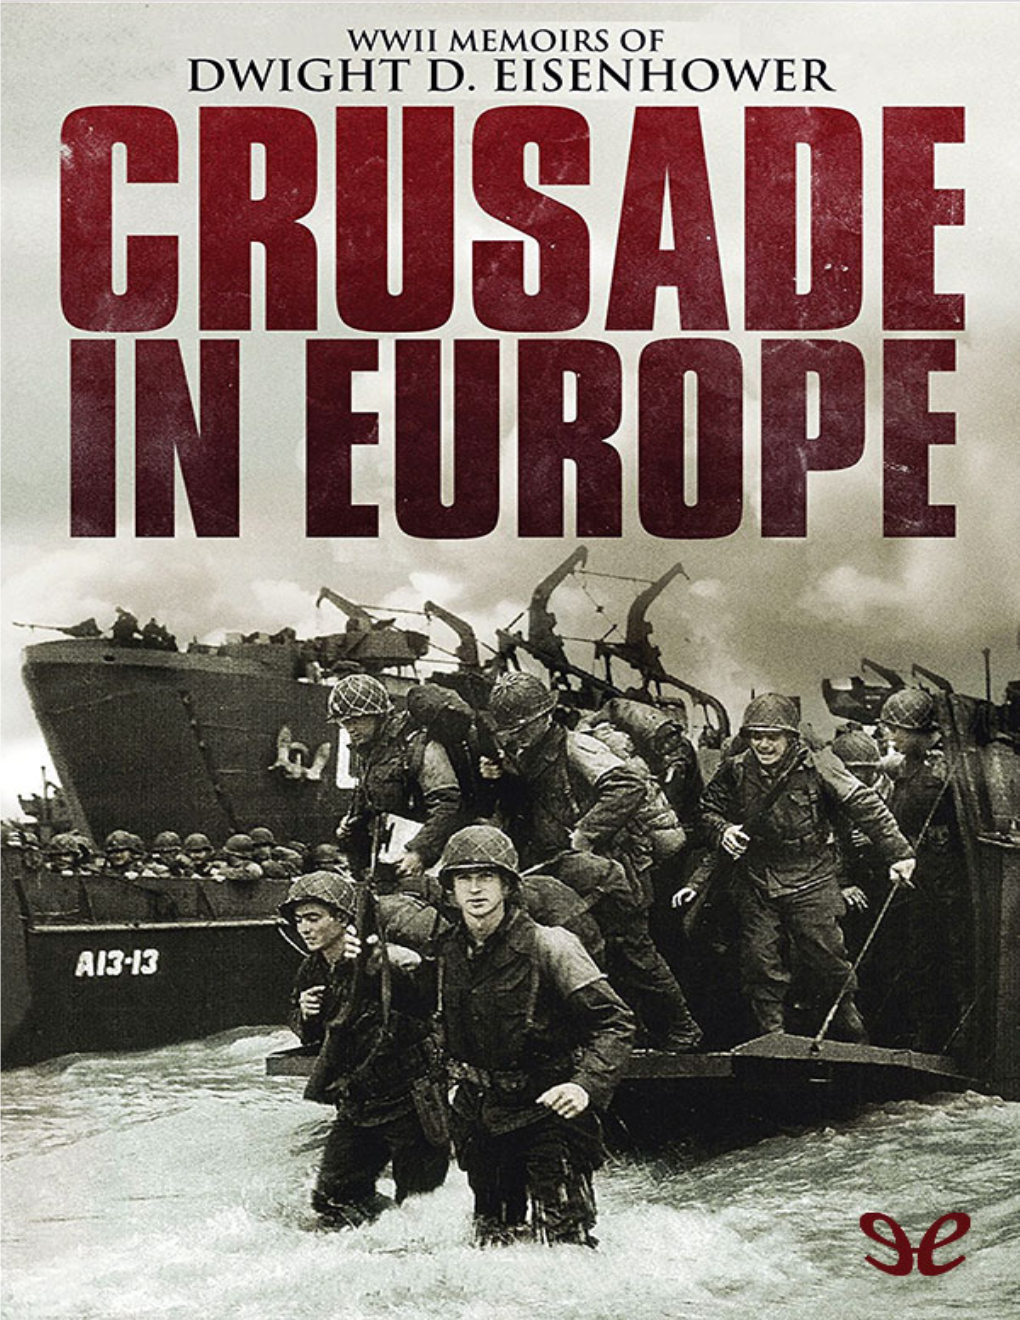 Crusade in Europe Tells the Complete Story of the War As Eisenhower Planned and Lived It